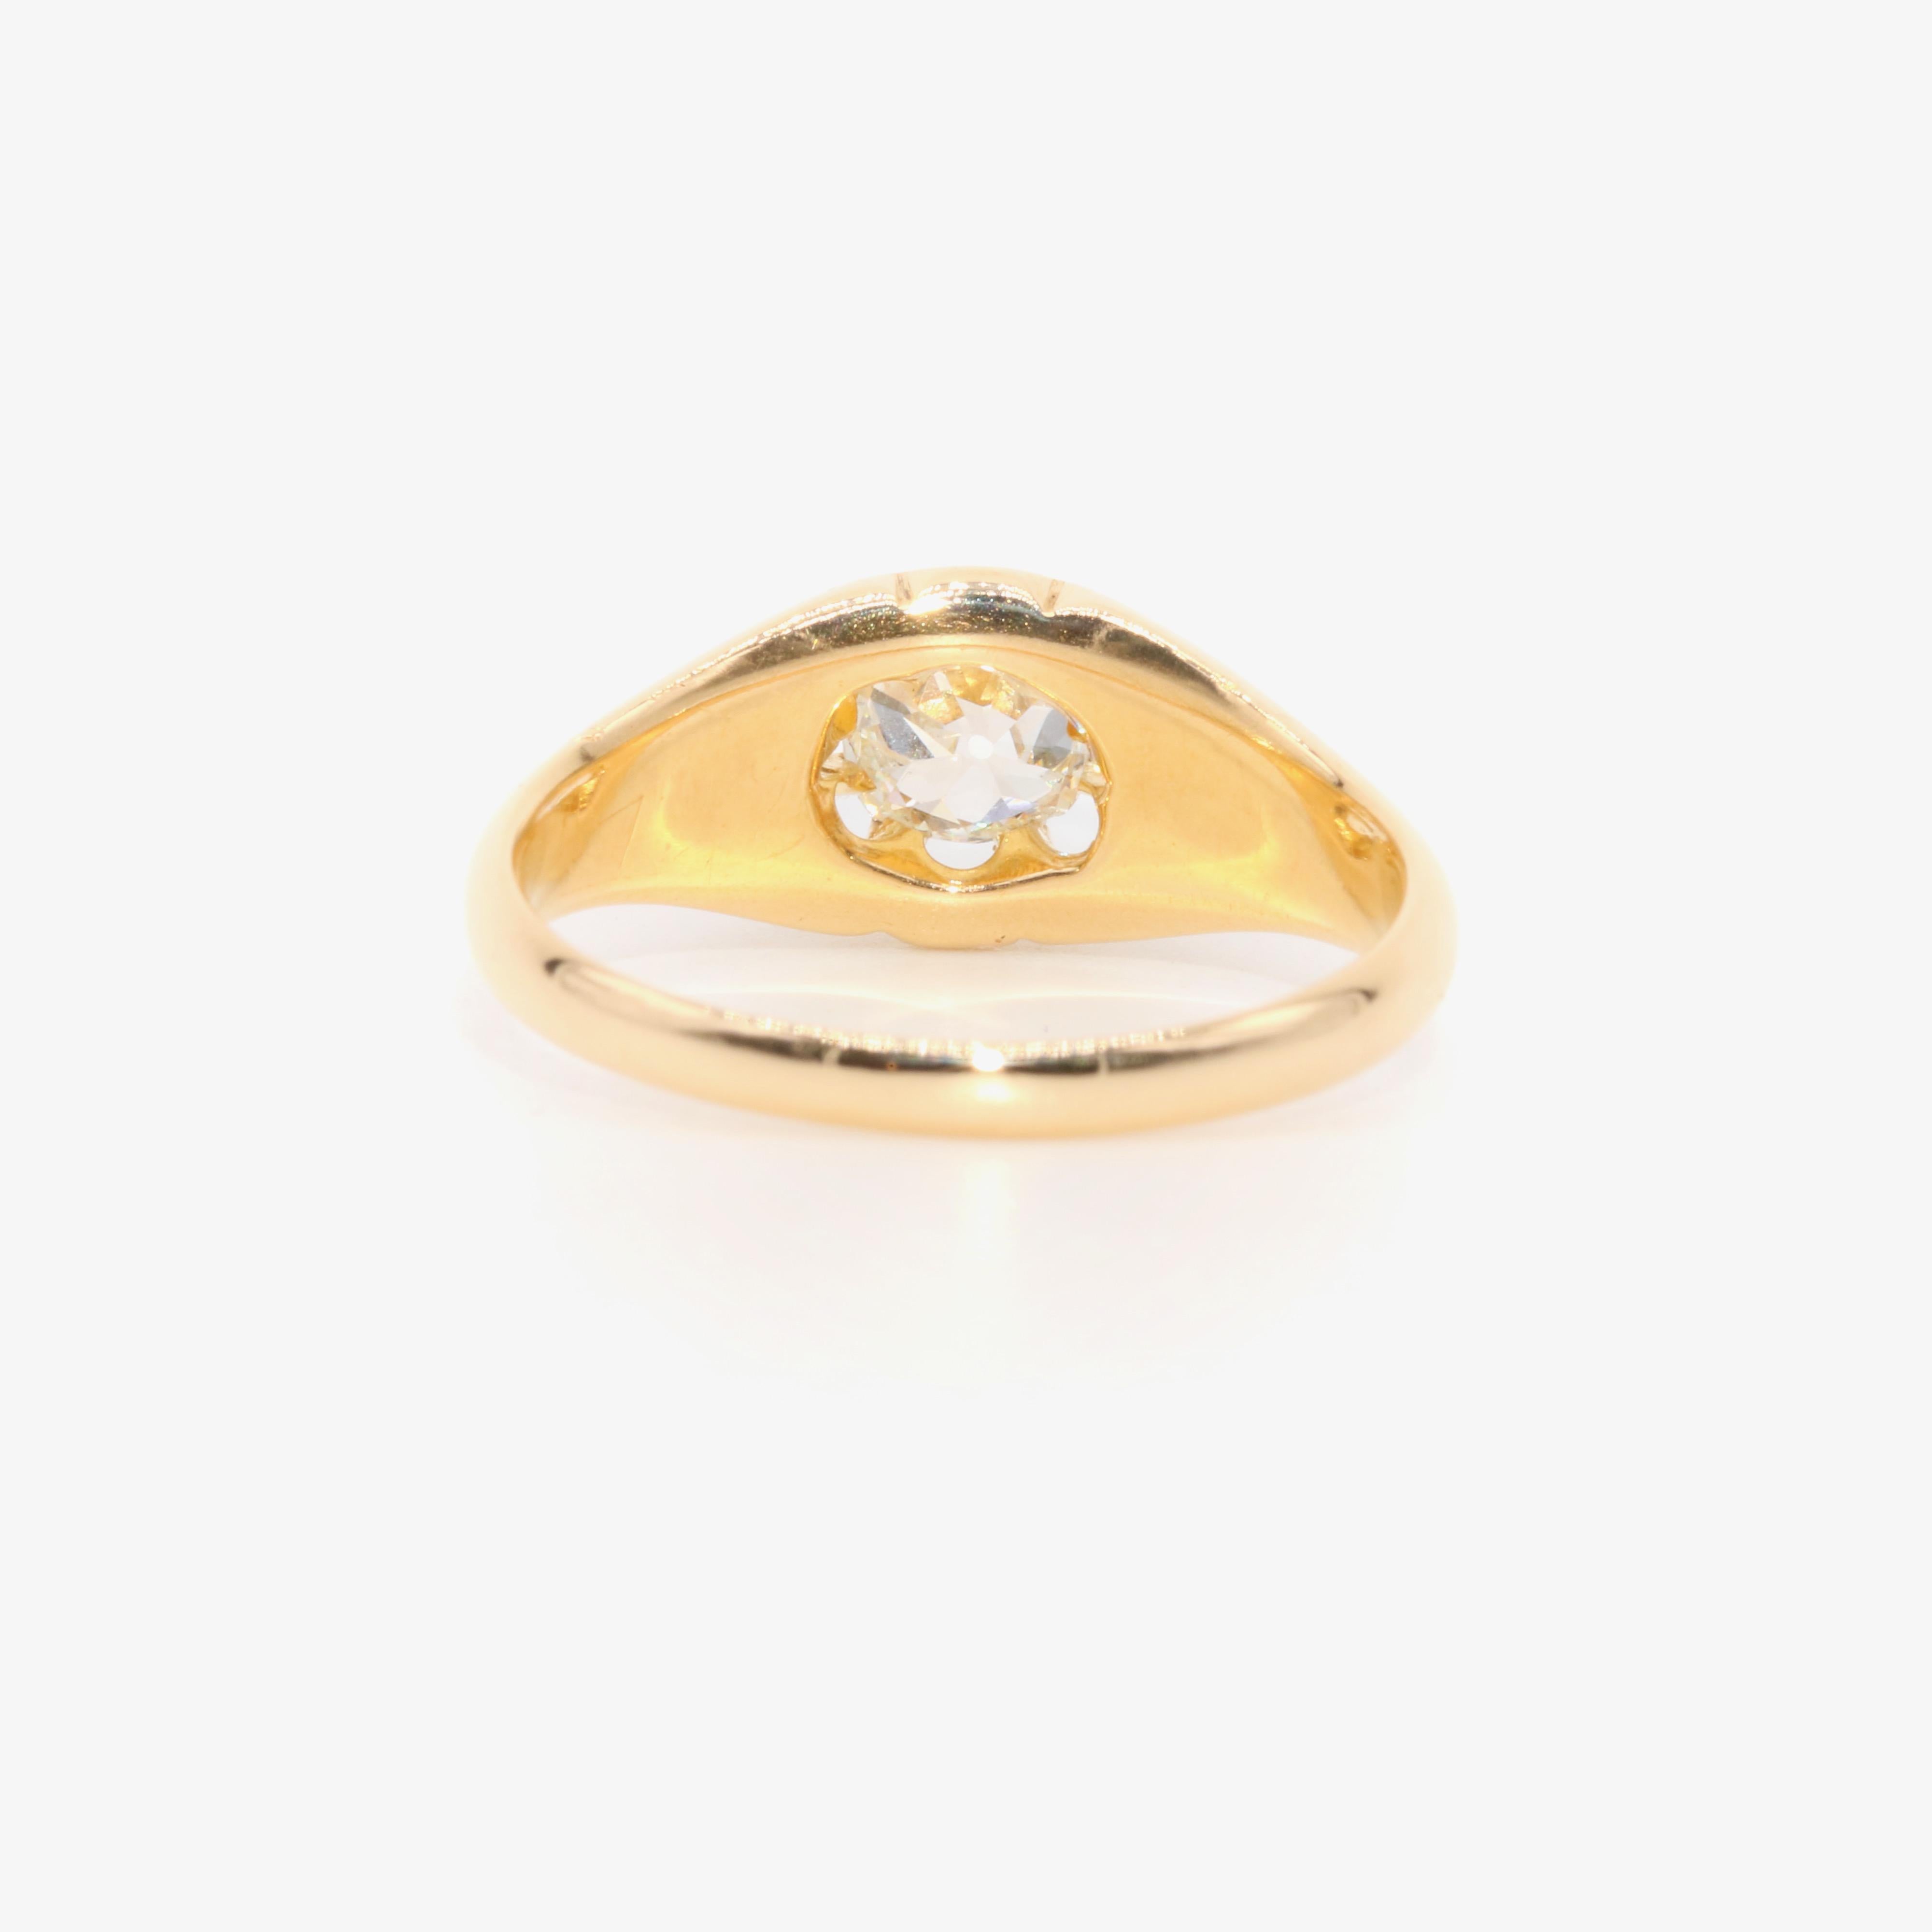 Antique Edwardian 18K Yellow Gold 0.75ct Old Mine Cut Diamond Belcher Ring For Sale 1